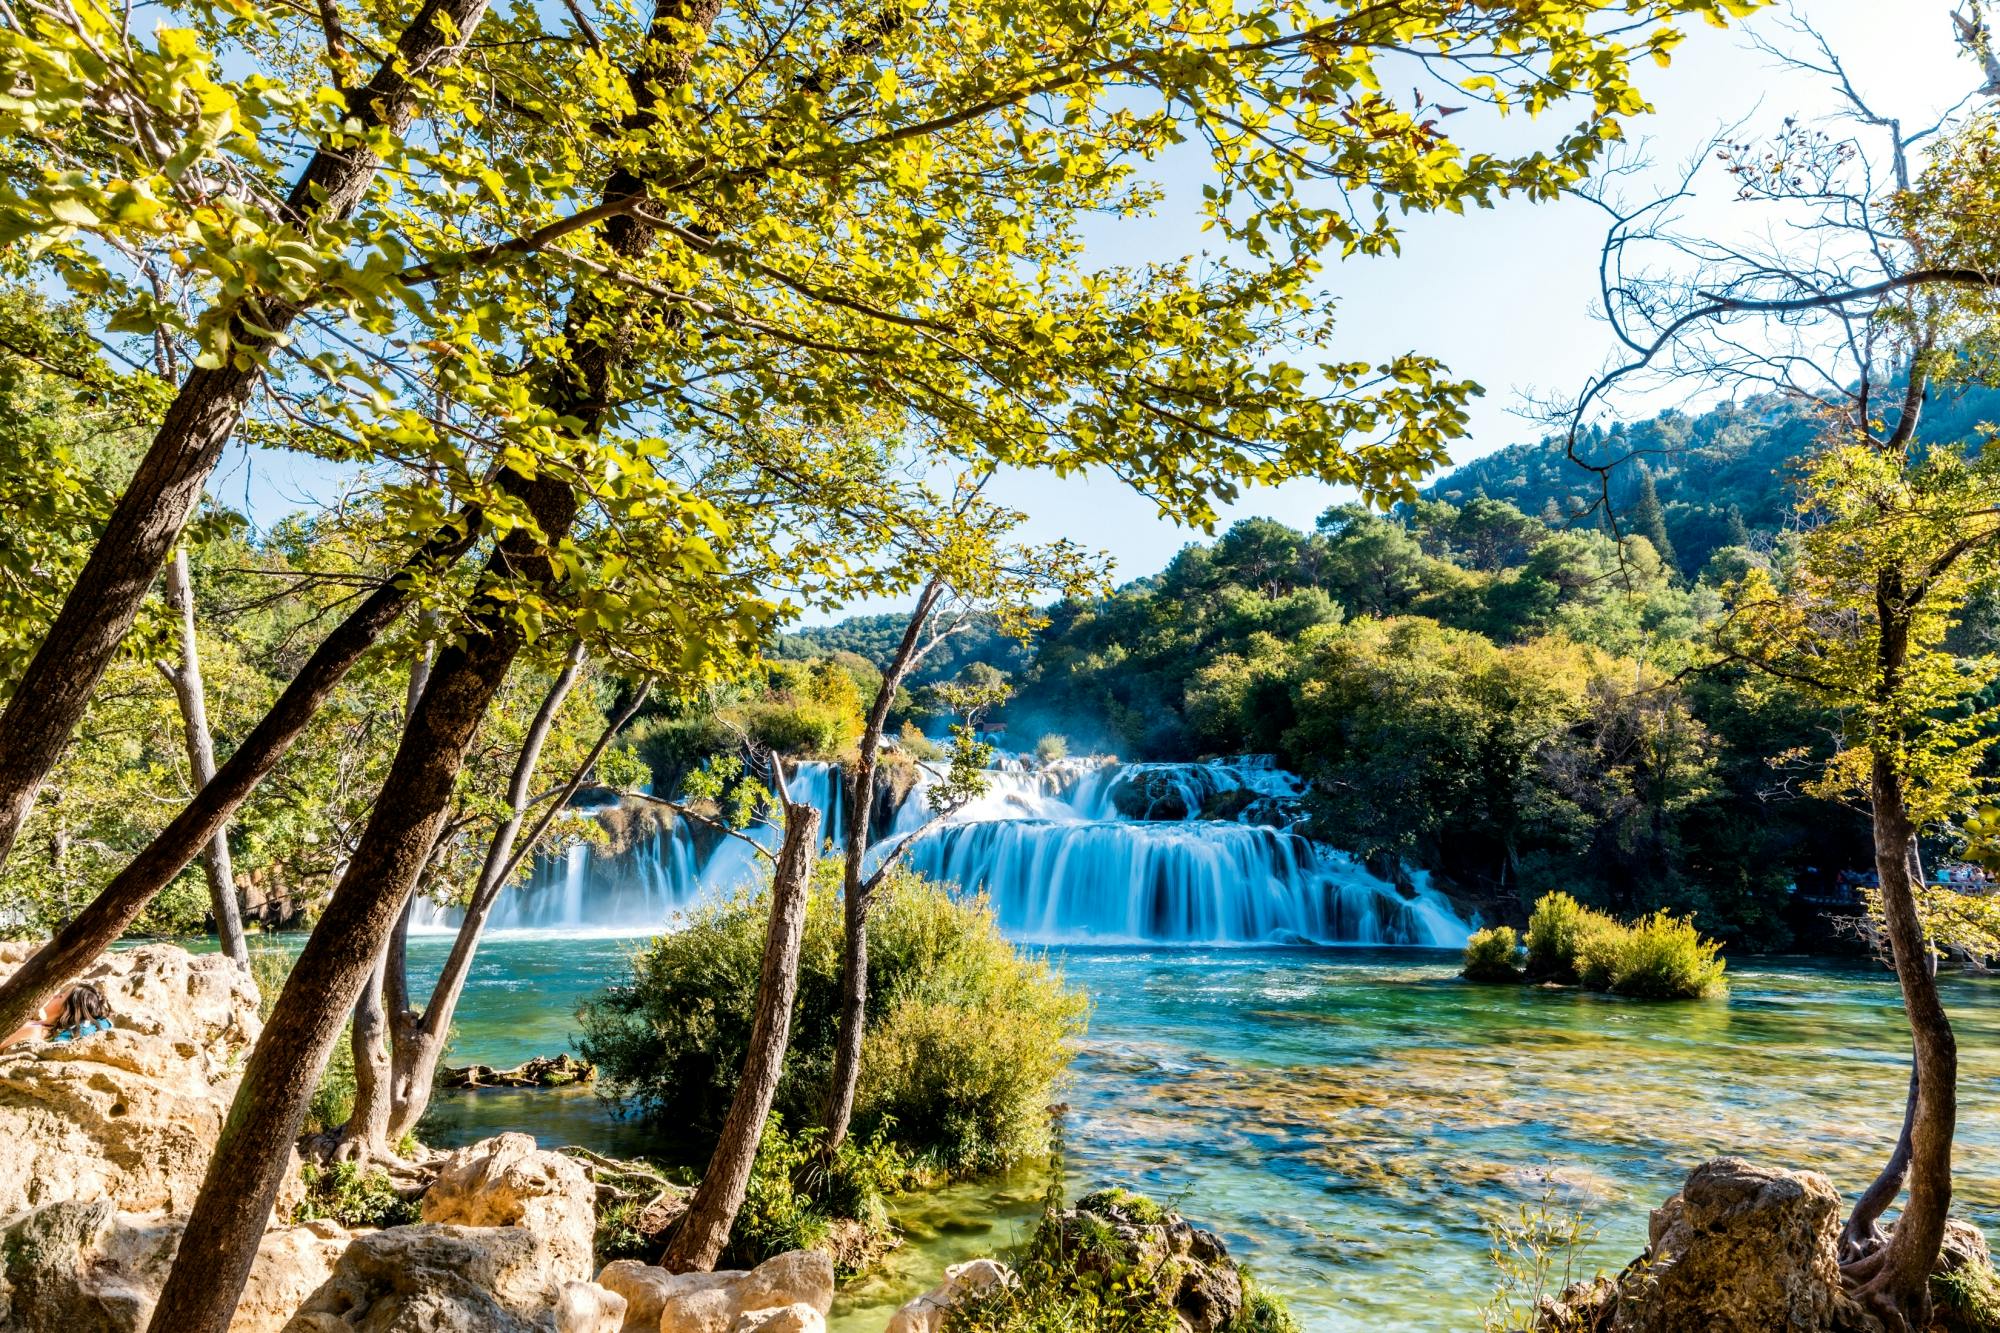 Day tour to Krka Wateralls from Split Musement